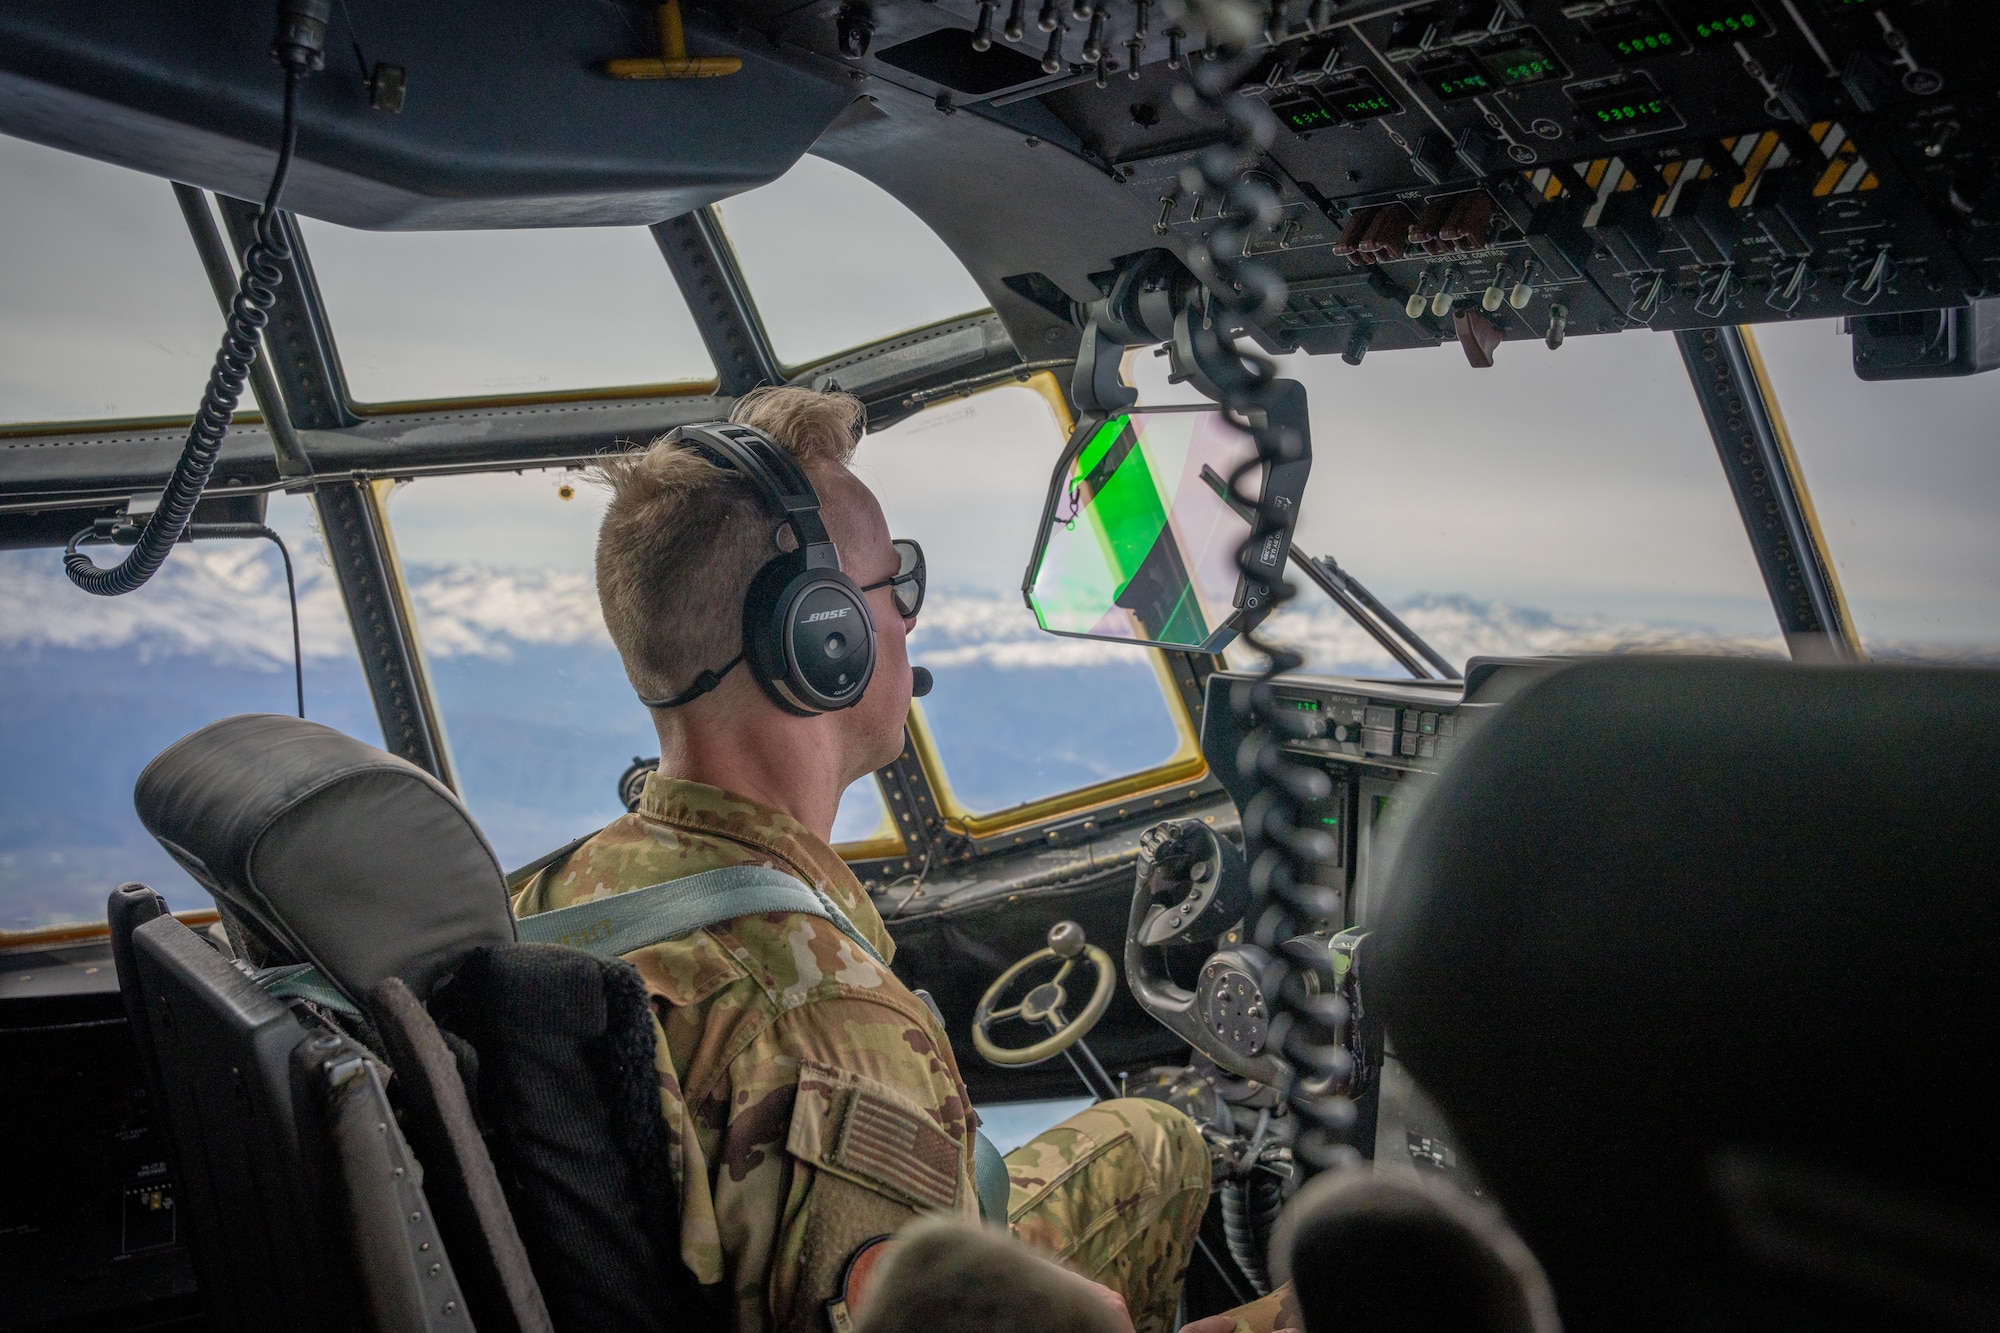 A pilot from the 39th Airlift Squadron out of the 317th Airlift Wing, Dyess AFB, TX flies a C-130J Super Hercules south of Santiago, Chile, July 28, 2023, during exercise Southern Star 23. Exercise Southern Star 23 is a Chilean-led full-scale Special Operations, Joint, and Combined Employment Exercise. The training consists of staff planning, tactical maneuvers, and collaboration among SOUTHCOM components’ staff, Chilean Armed Forces, and interagency partners during a stabilization scenario which facilitates the opportunity for participants to execute and assess the staff’s ability to plan, coordinate and execute command and control, logistical support, and decision-making processes in a crisis scenario. (U.S. Air Force photo by Staff Sgt. Clayton Wear)